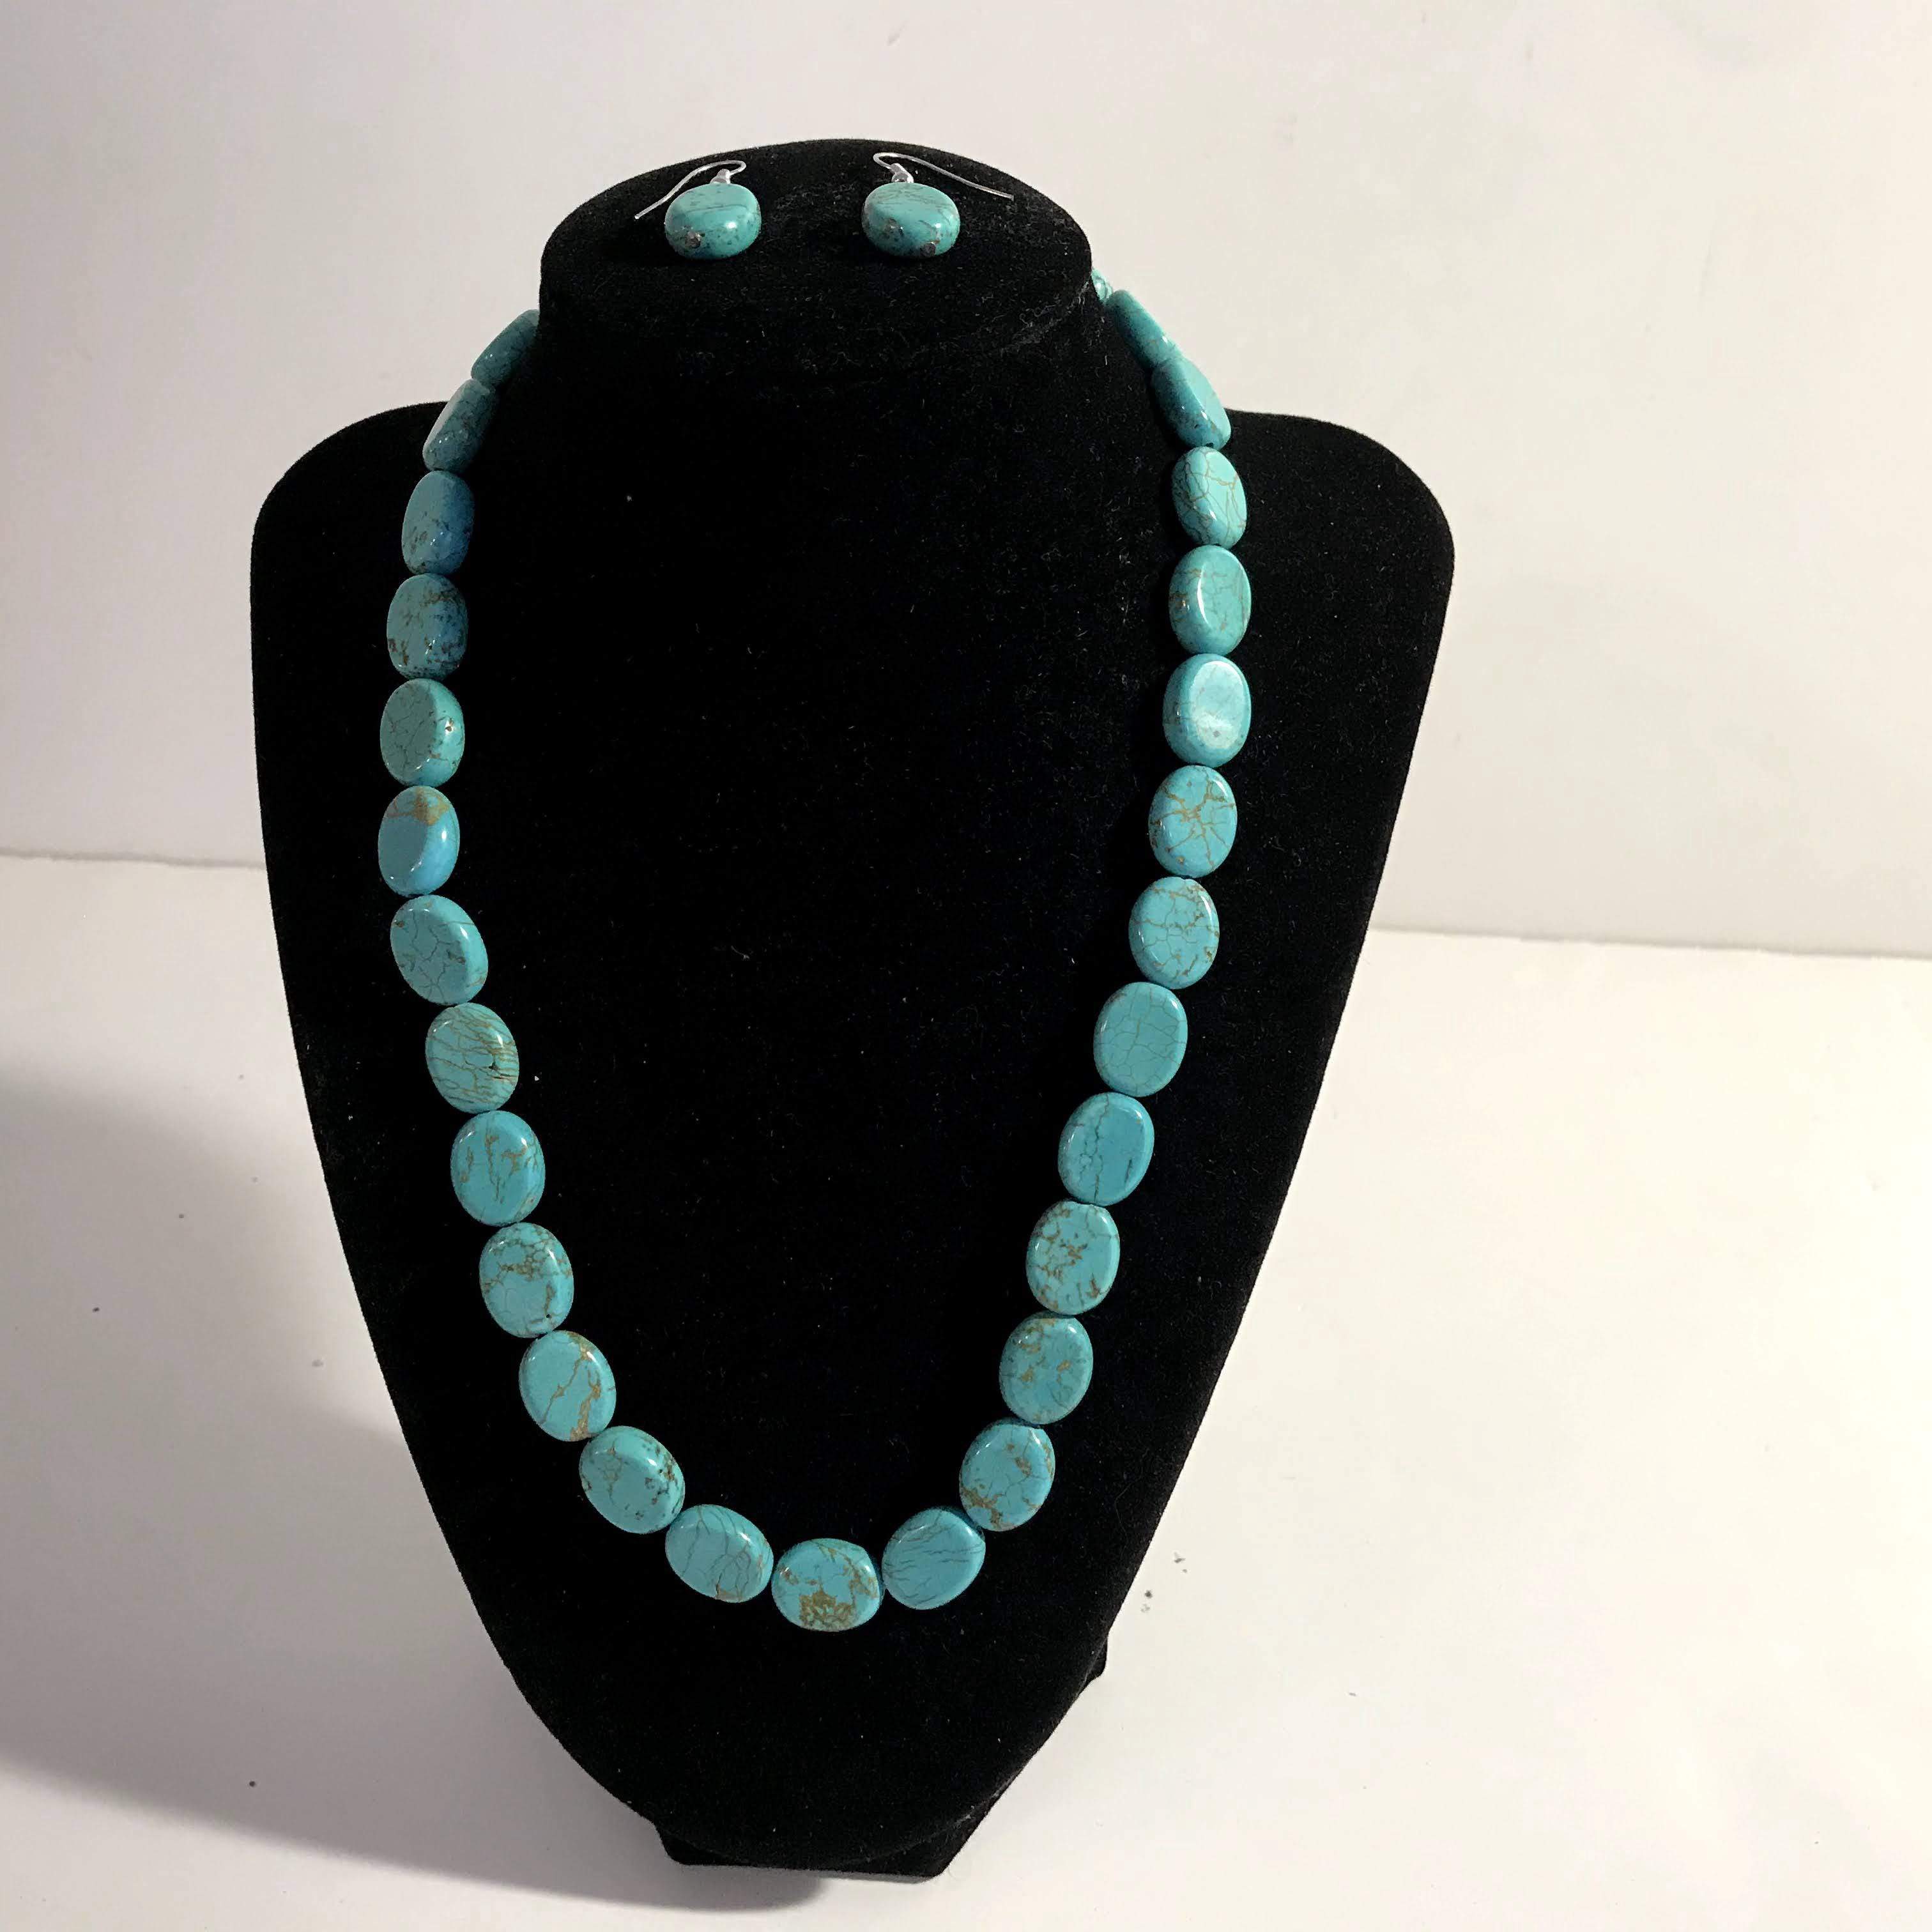 American West Blue Turquoise Round Stone Necklace w/ Matching Earrings - Shop Thrifty Treasures